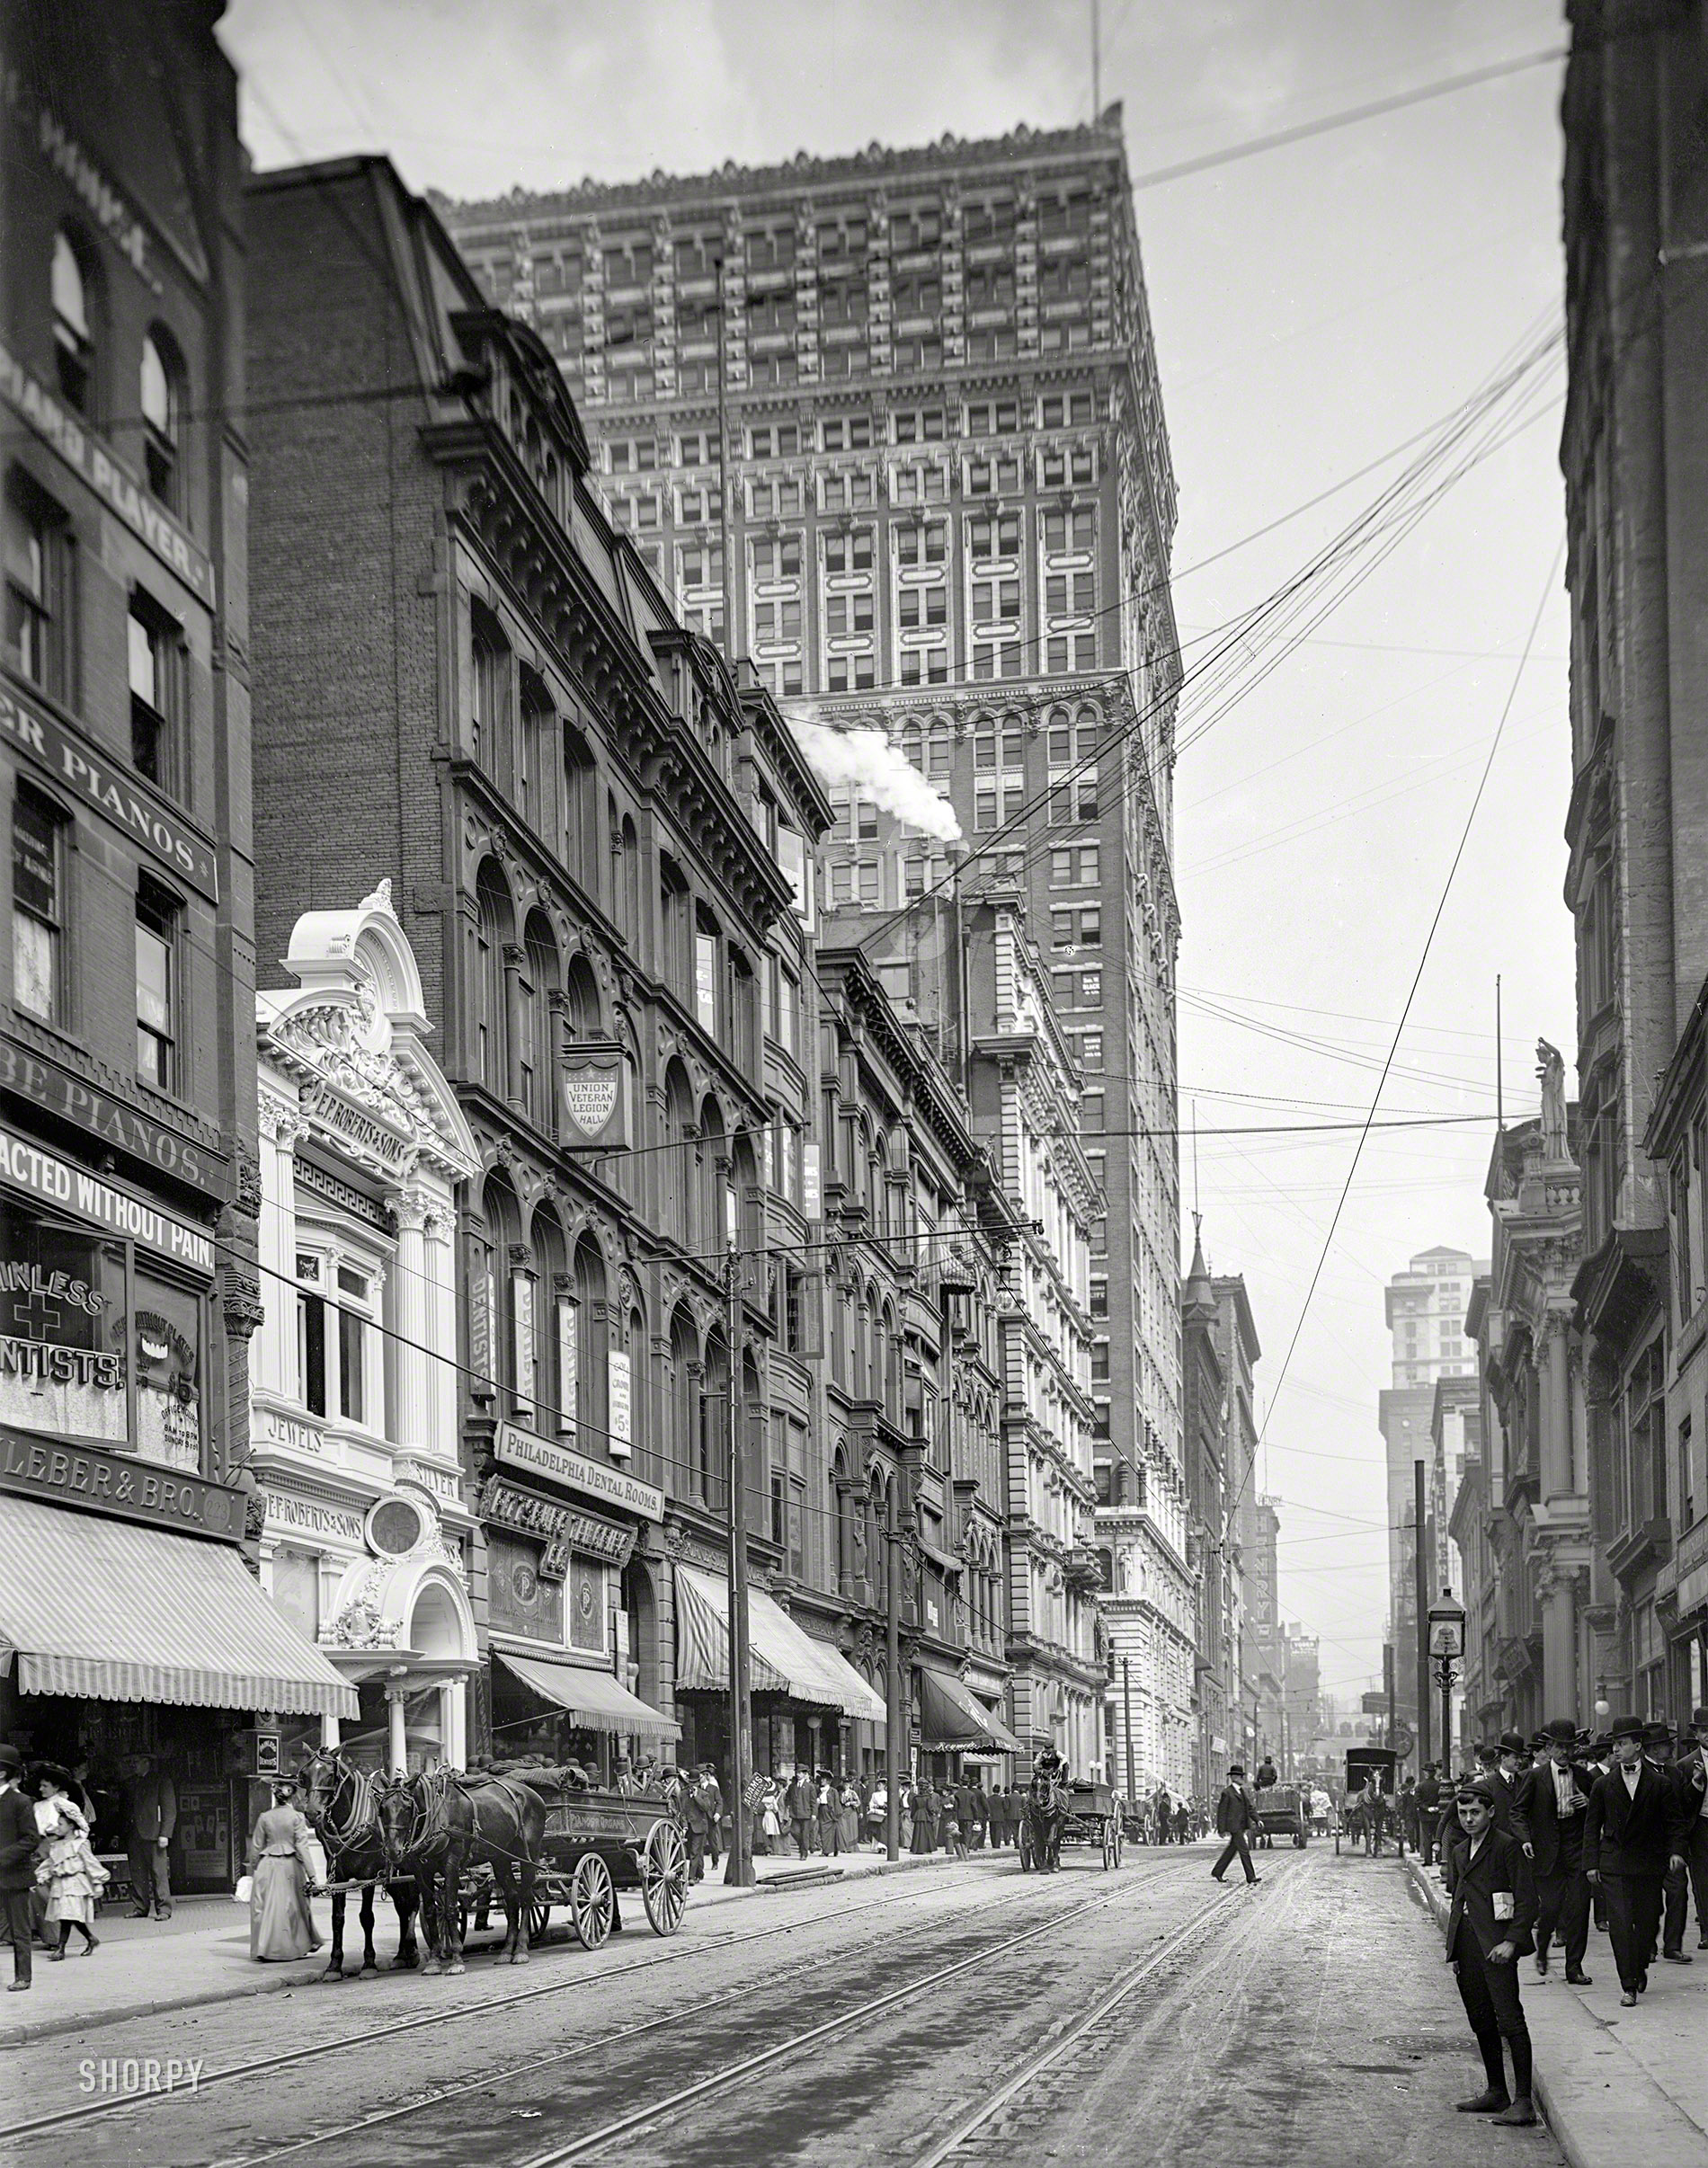 1904. "Fifth Avenue, Pittsburg, Pa." Address of the Philadelphia Dental Rooms, on what seems to have been Pittsburgh's go-to street for Painless Dentistry. Looming over it all is the recently completed Farmers Bank building. View full size.